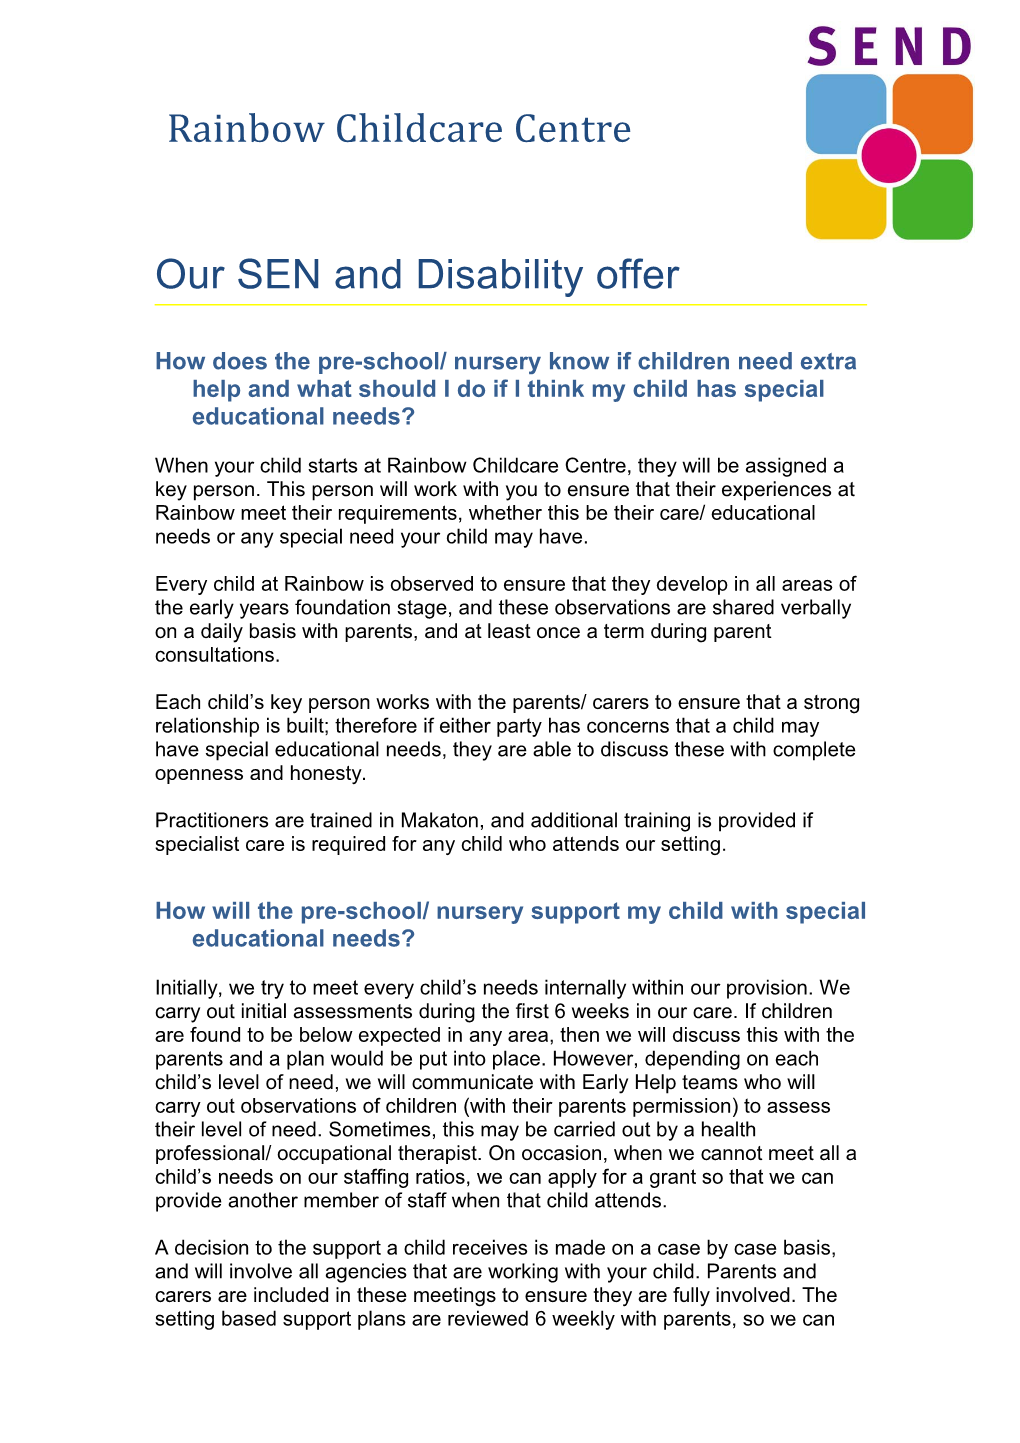 Our SEN and Disability Offer